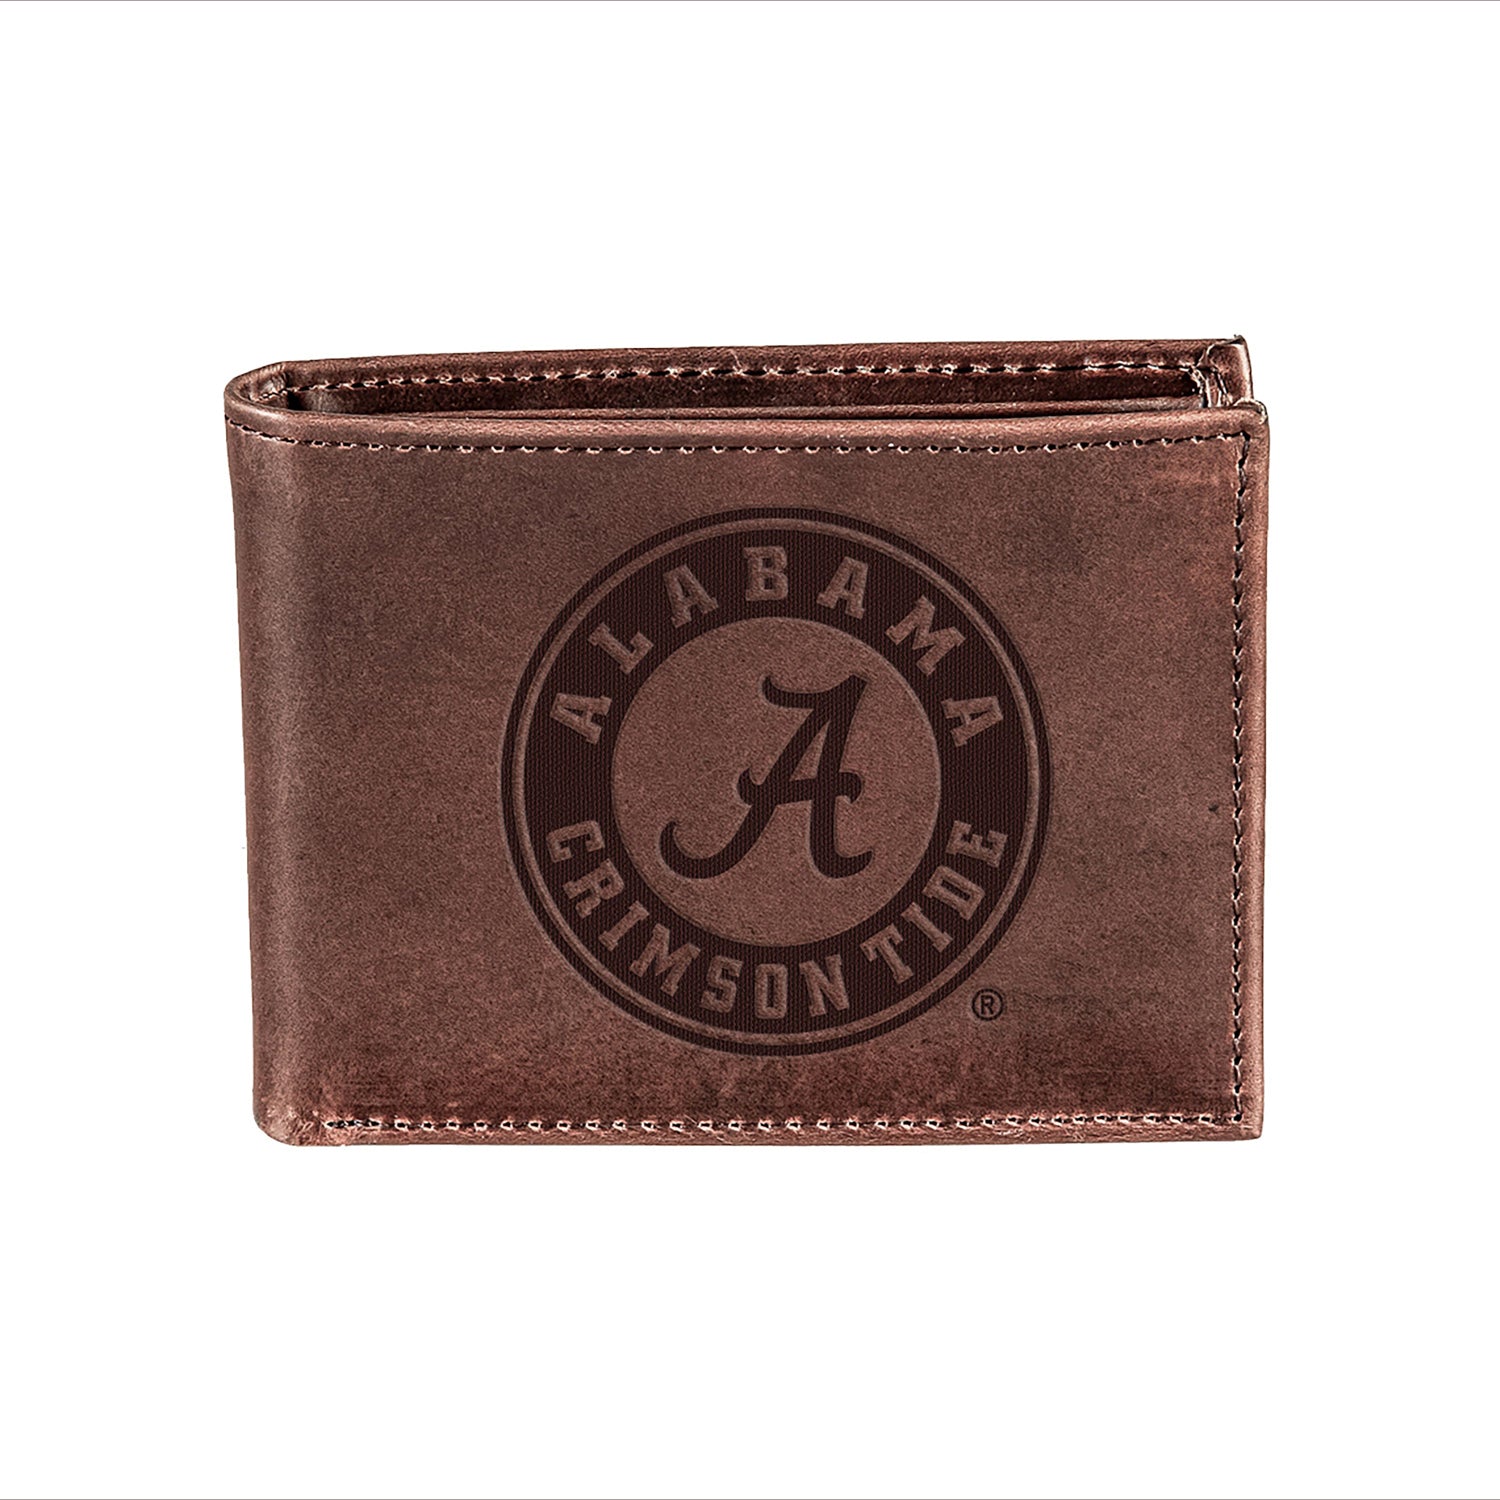 Alabama Bifold Leather Wallet, Brown, 100% Genuine Leather